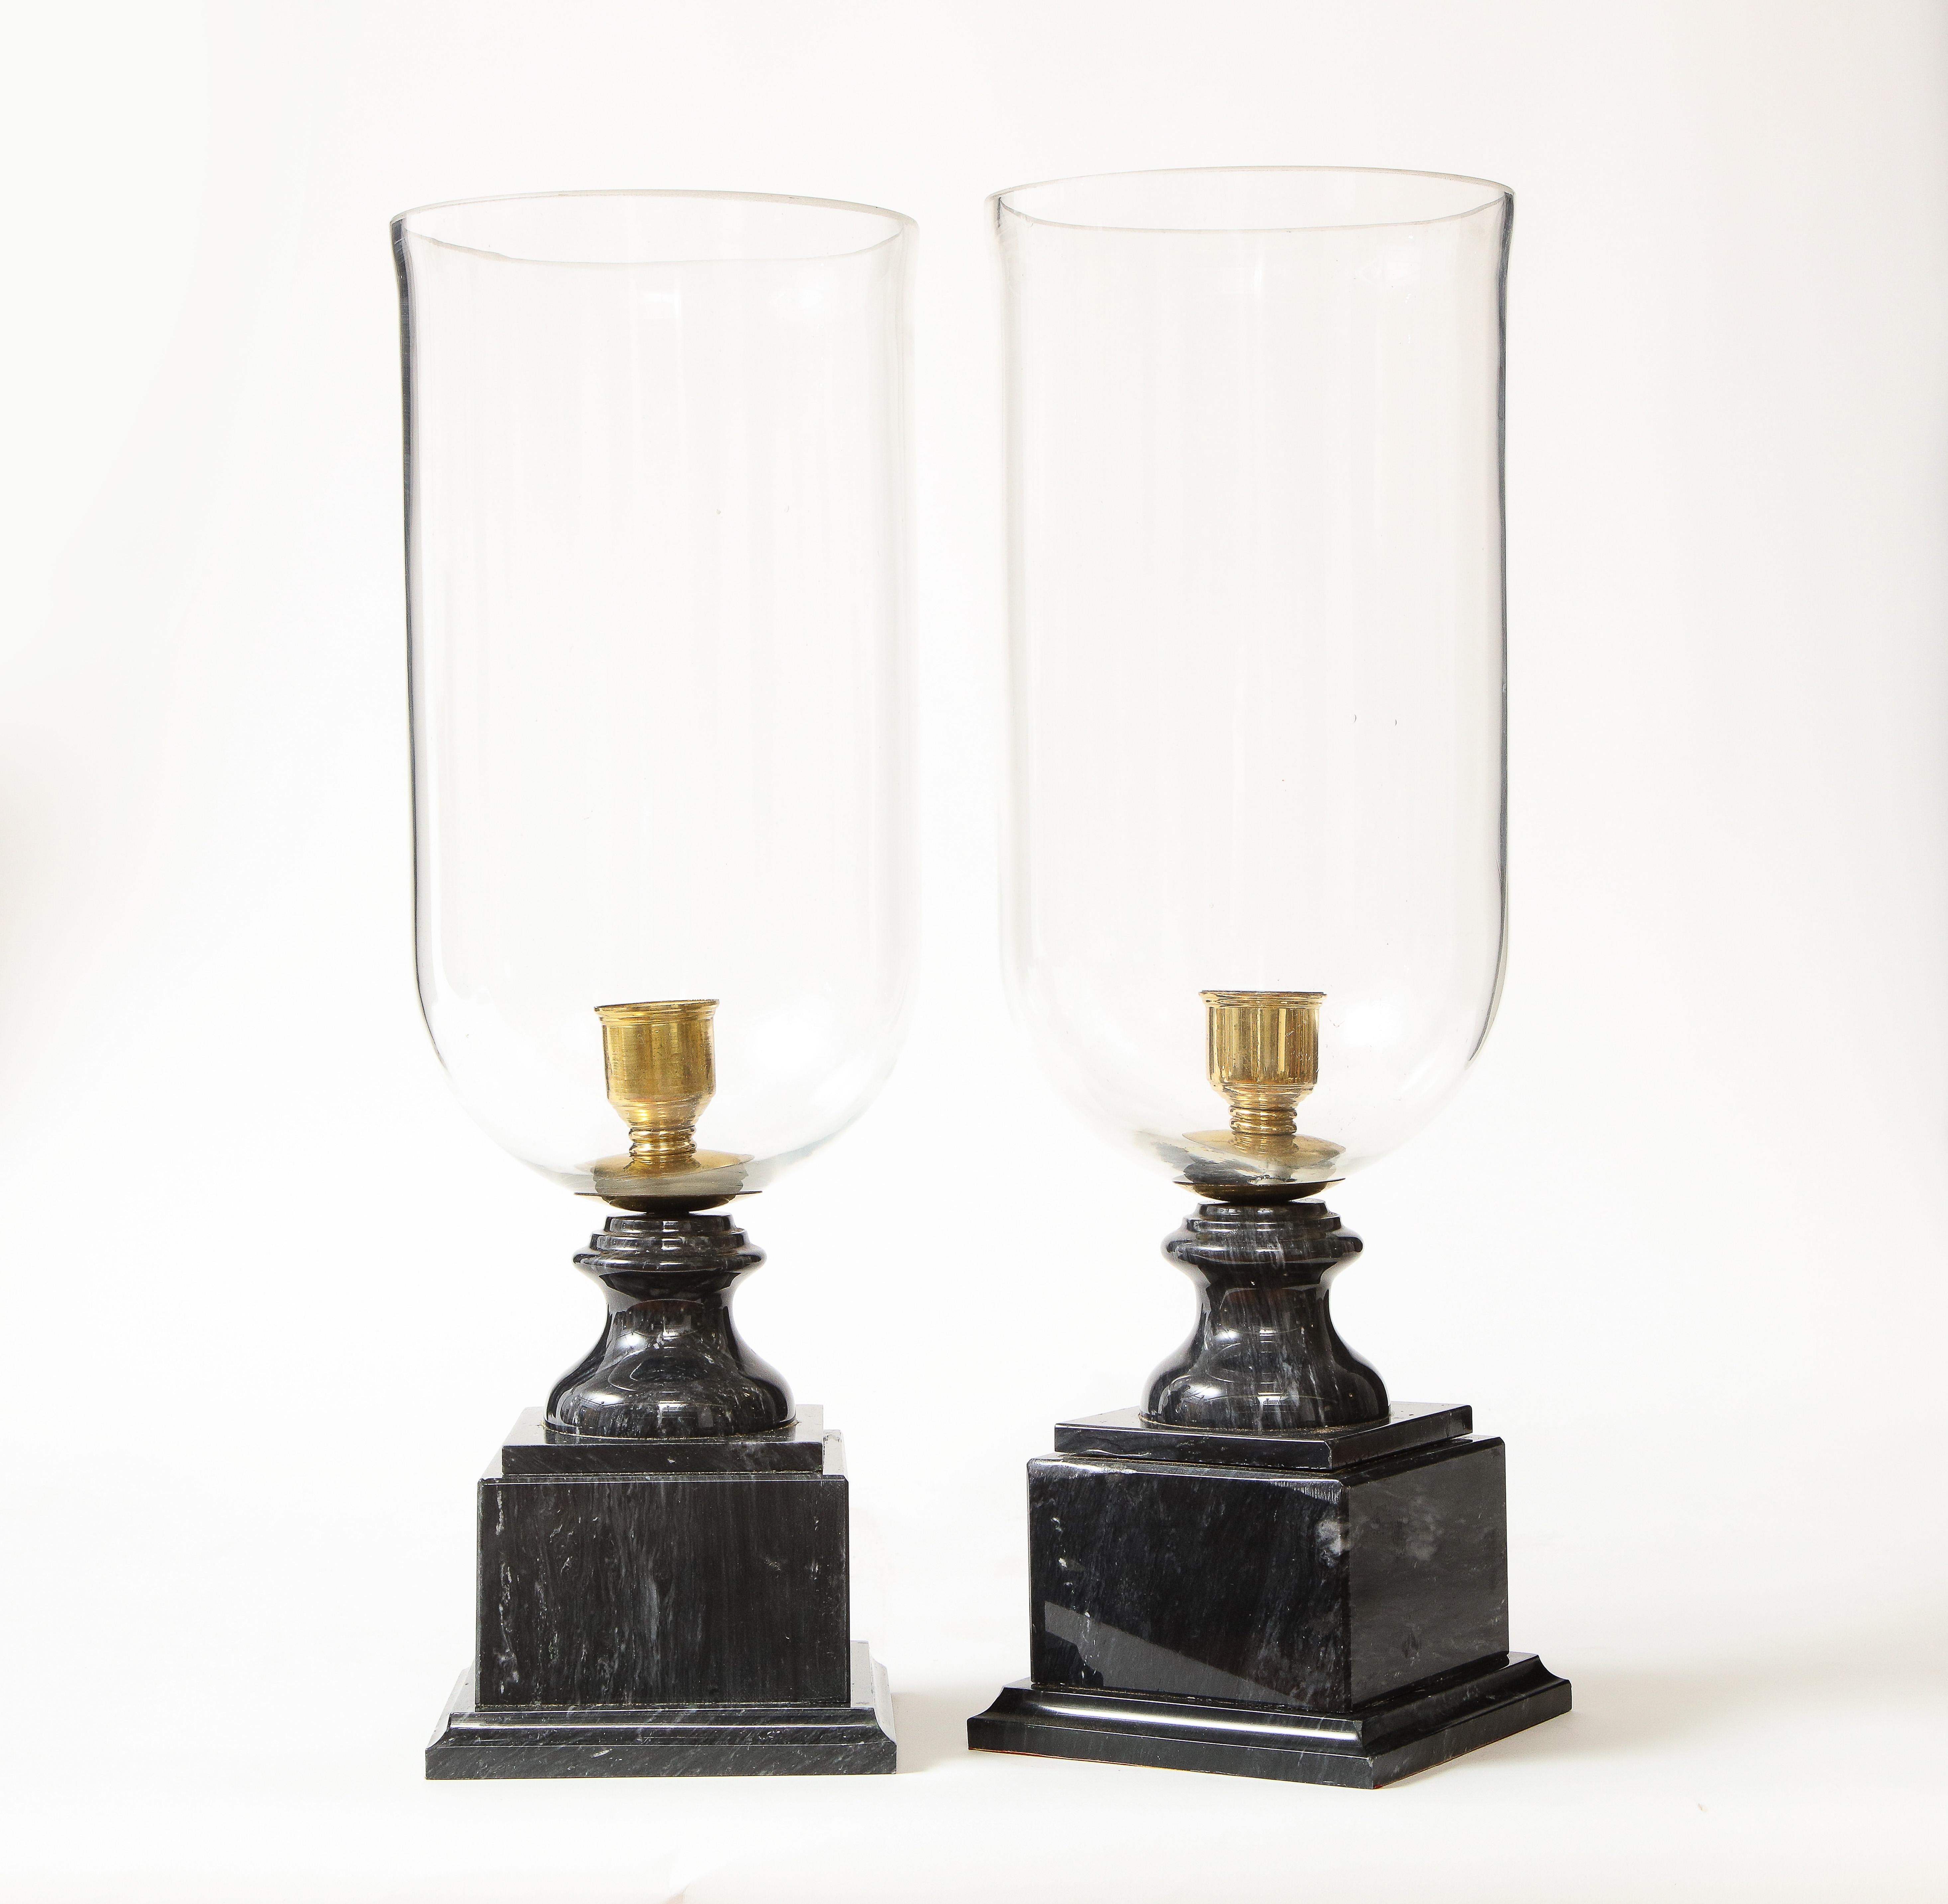 Each with a glass hurricane shade mounted on a turned polished black and white marble plinth base.